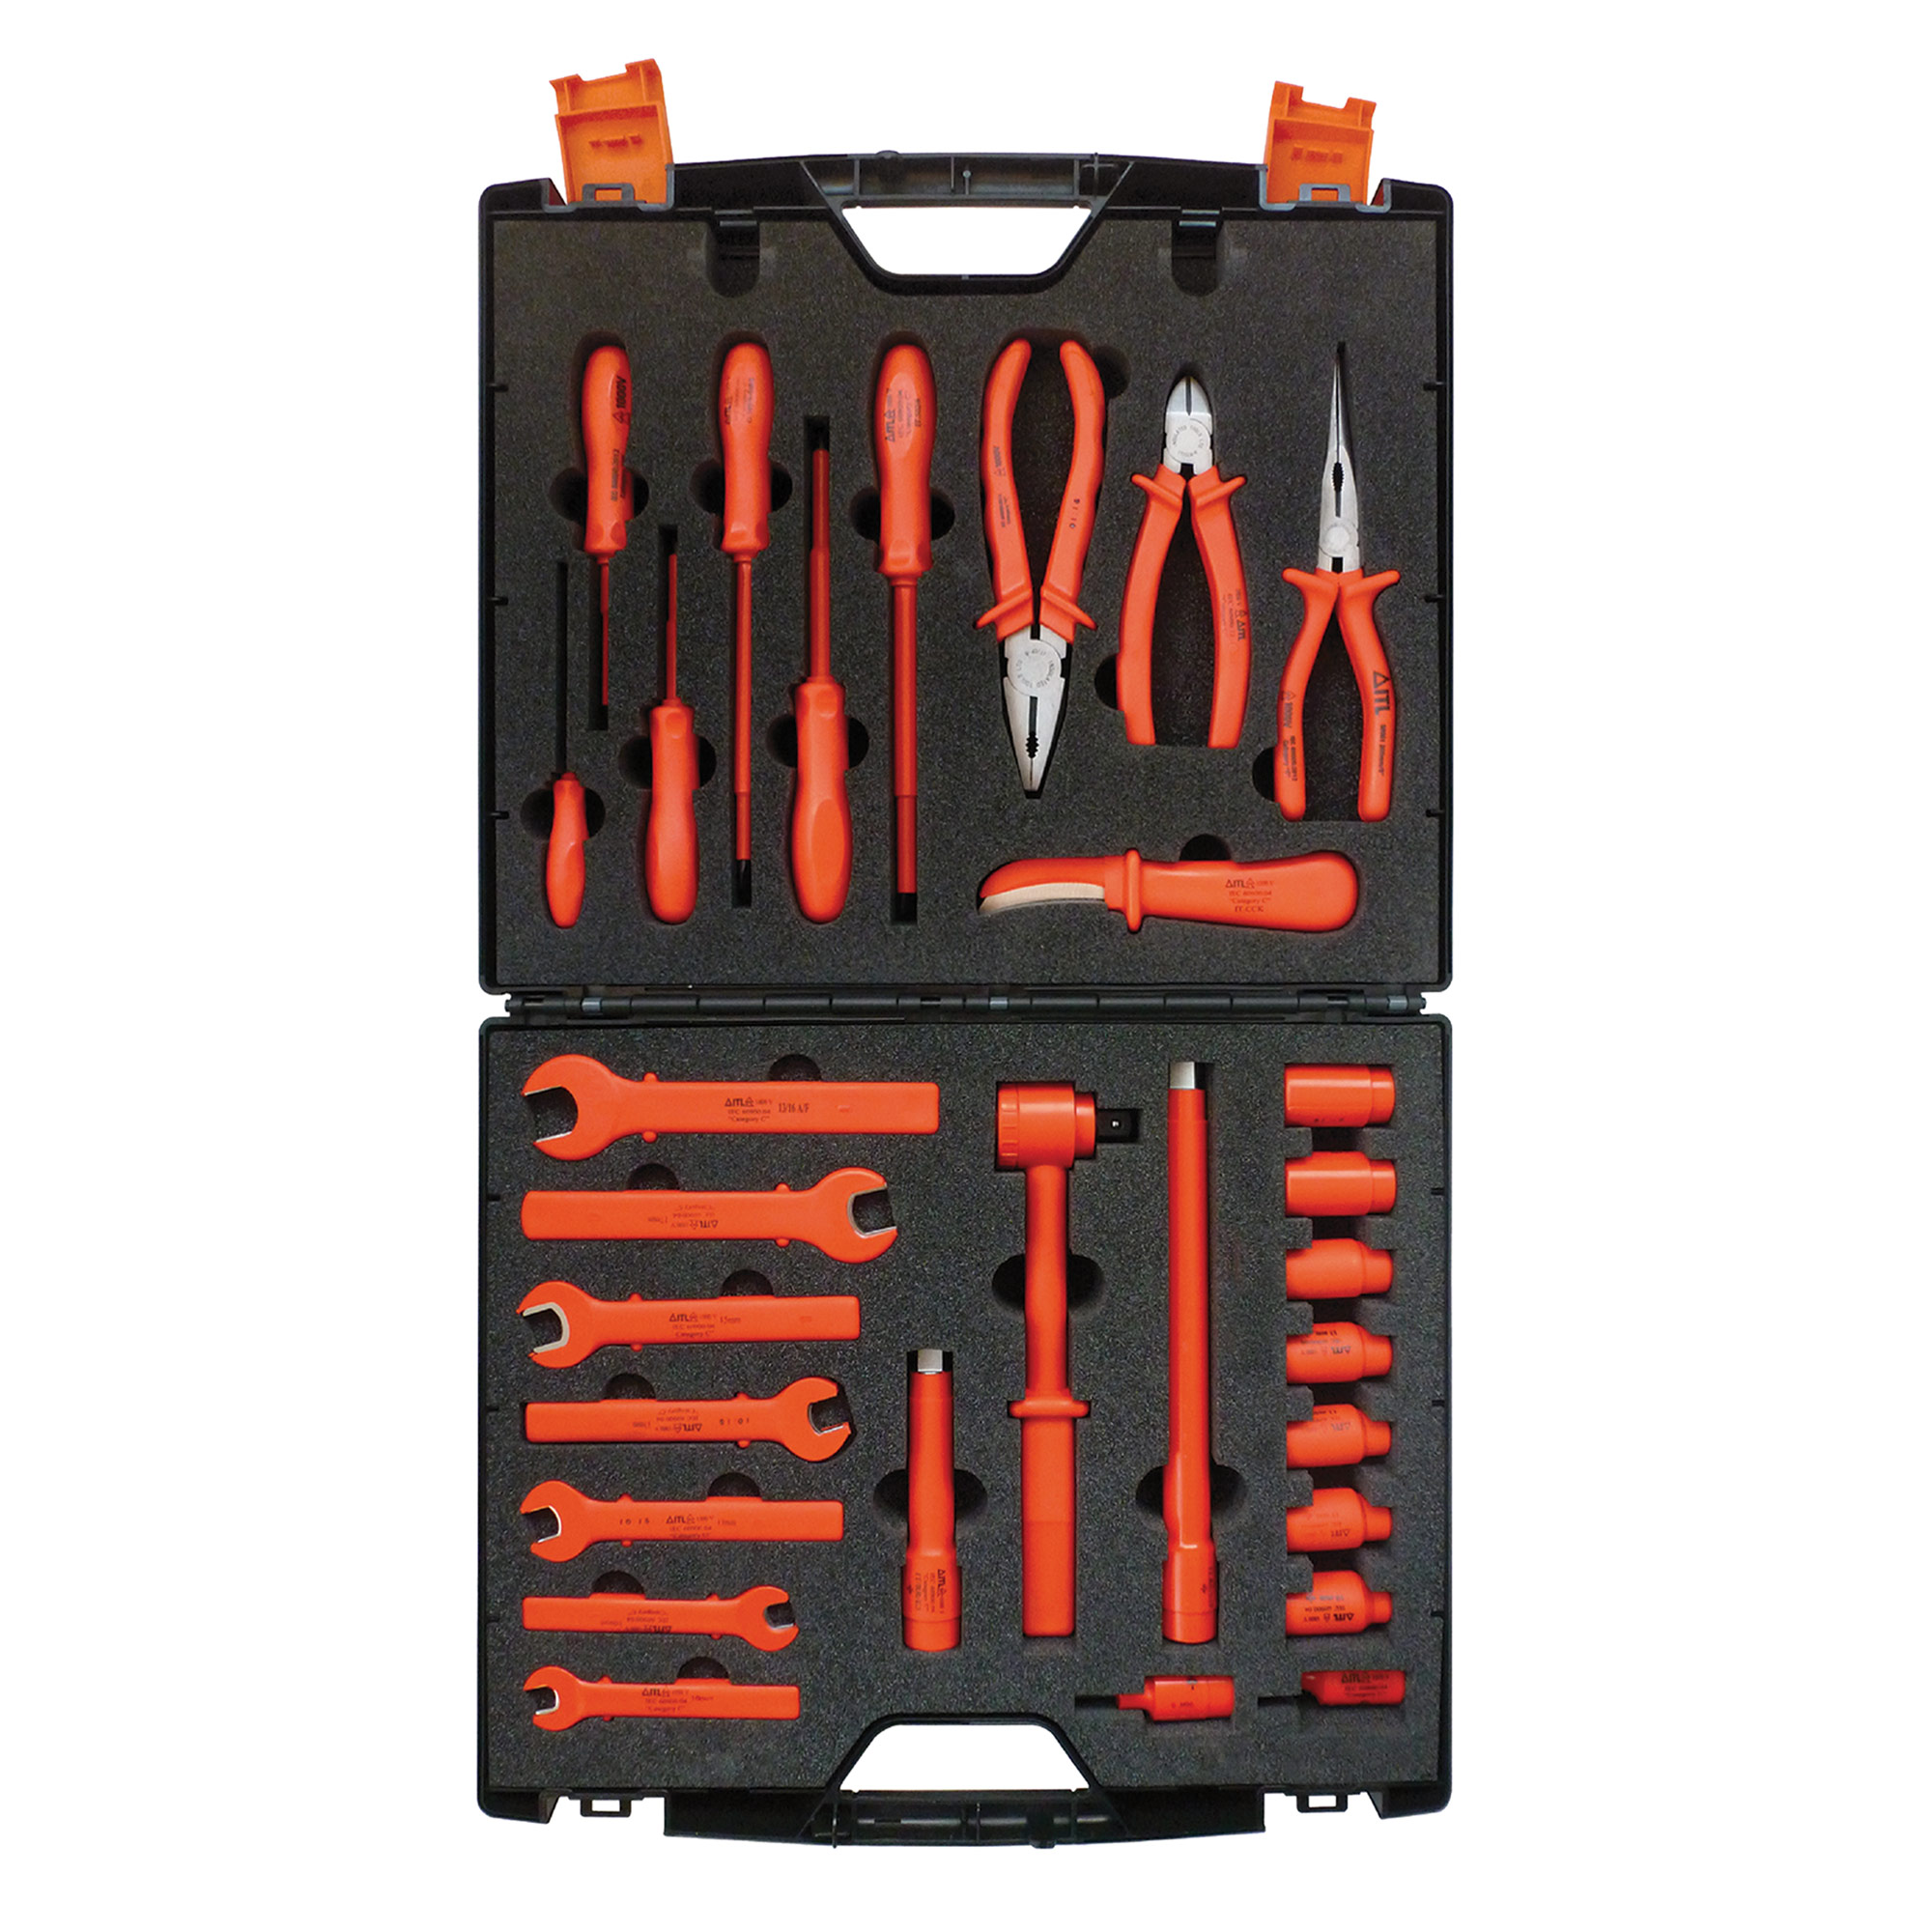 9pcs Insulated Screwdrivers Set for Electrical Work Electricians Tool Box 